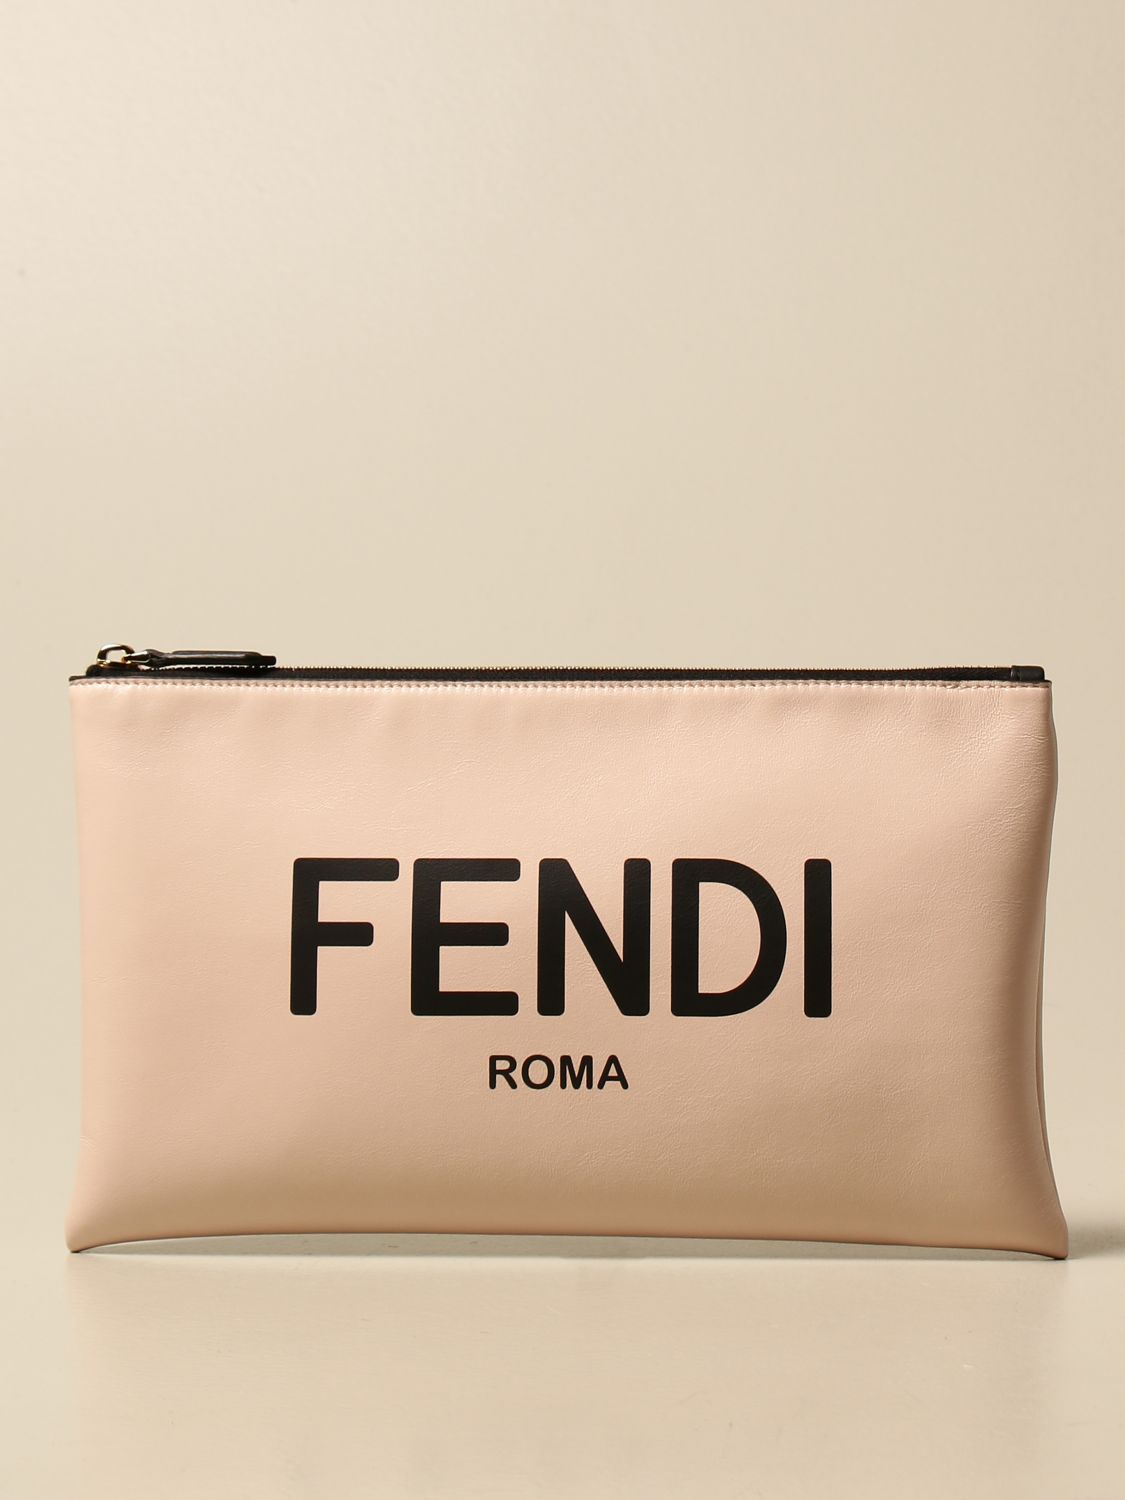 Fendi Roma Flat Pouch Large - Pink leather pouch